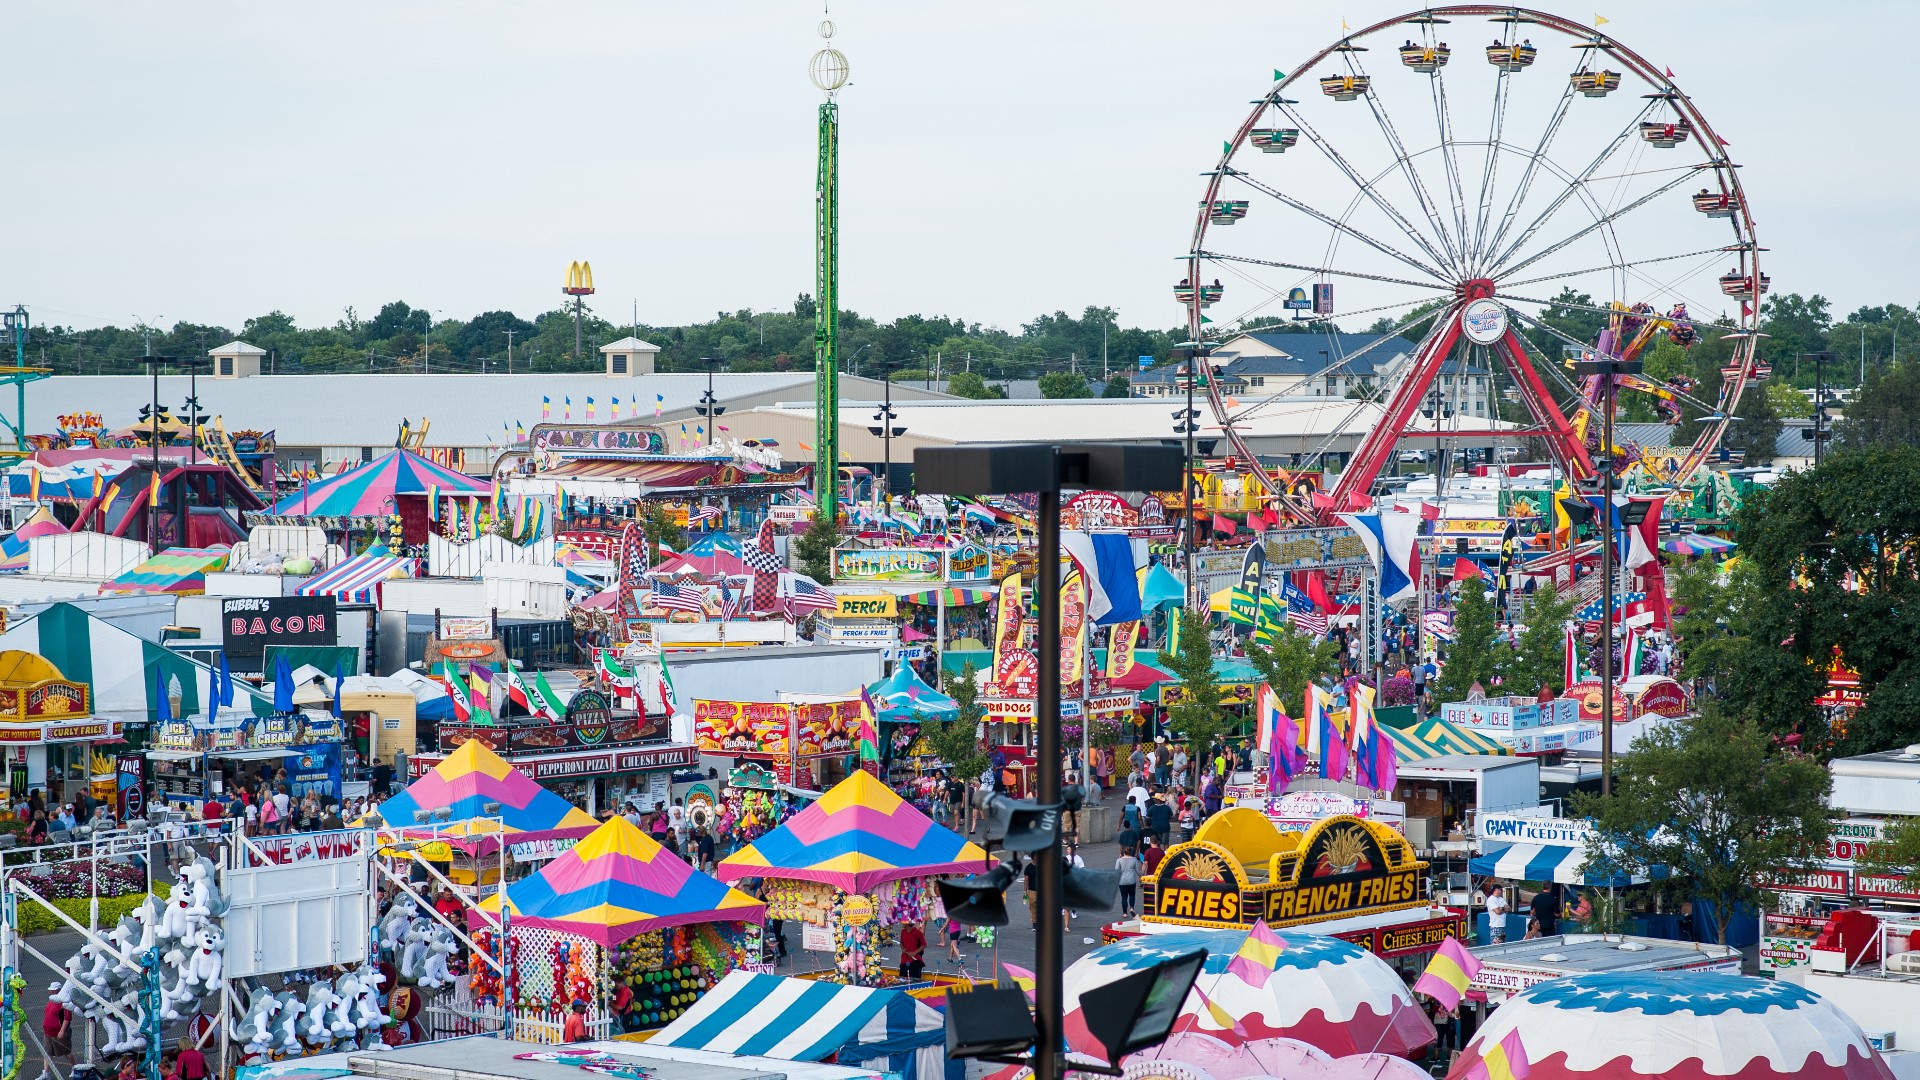 The 167th Ohio State Fair will run from July 27 to Aug. 7.